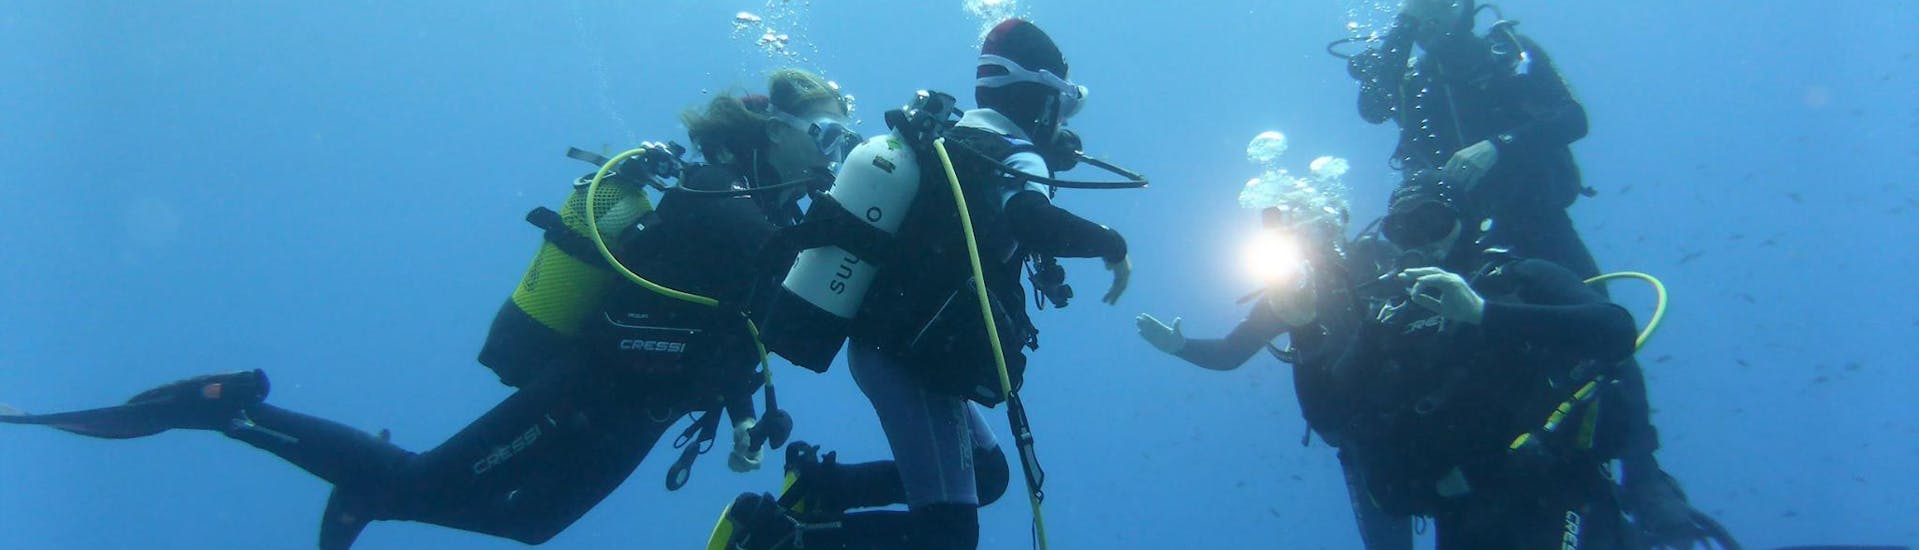 3 people doing rescue diving during PADI Divemaster Course for Certified Rescue Divers with Balear Divers.